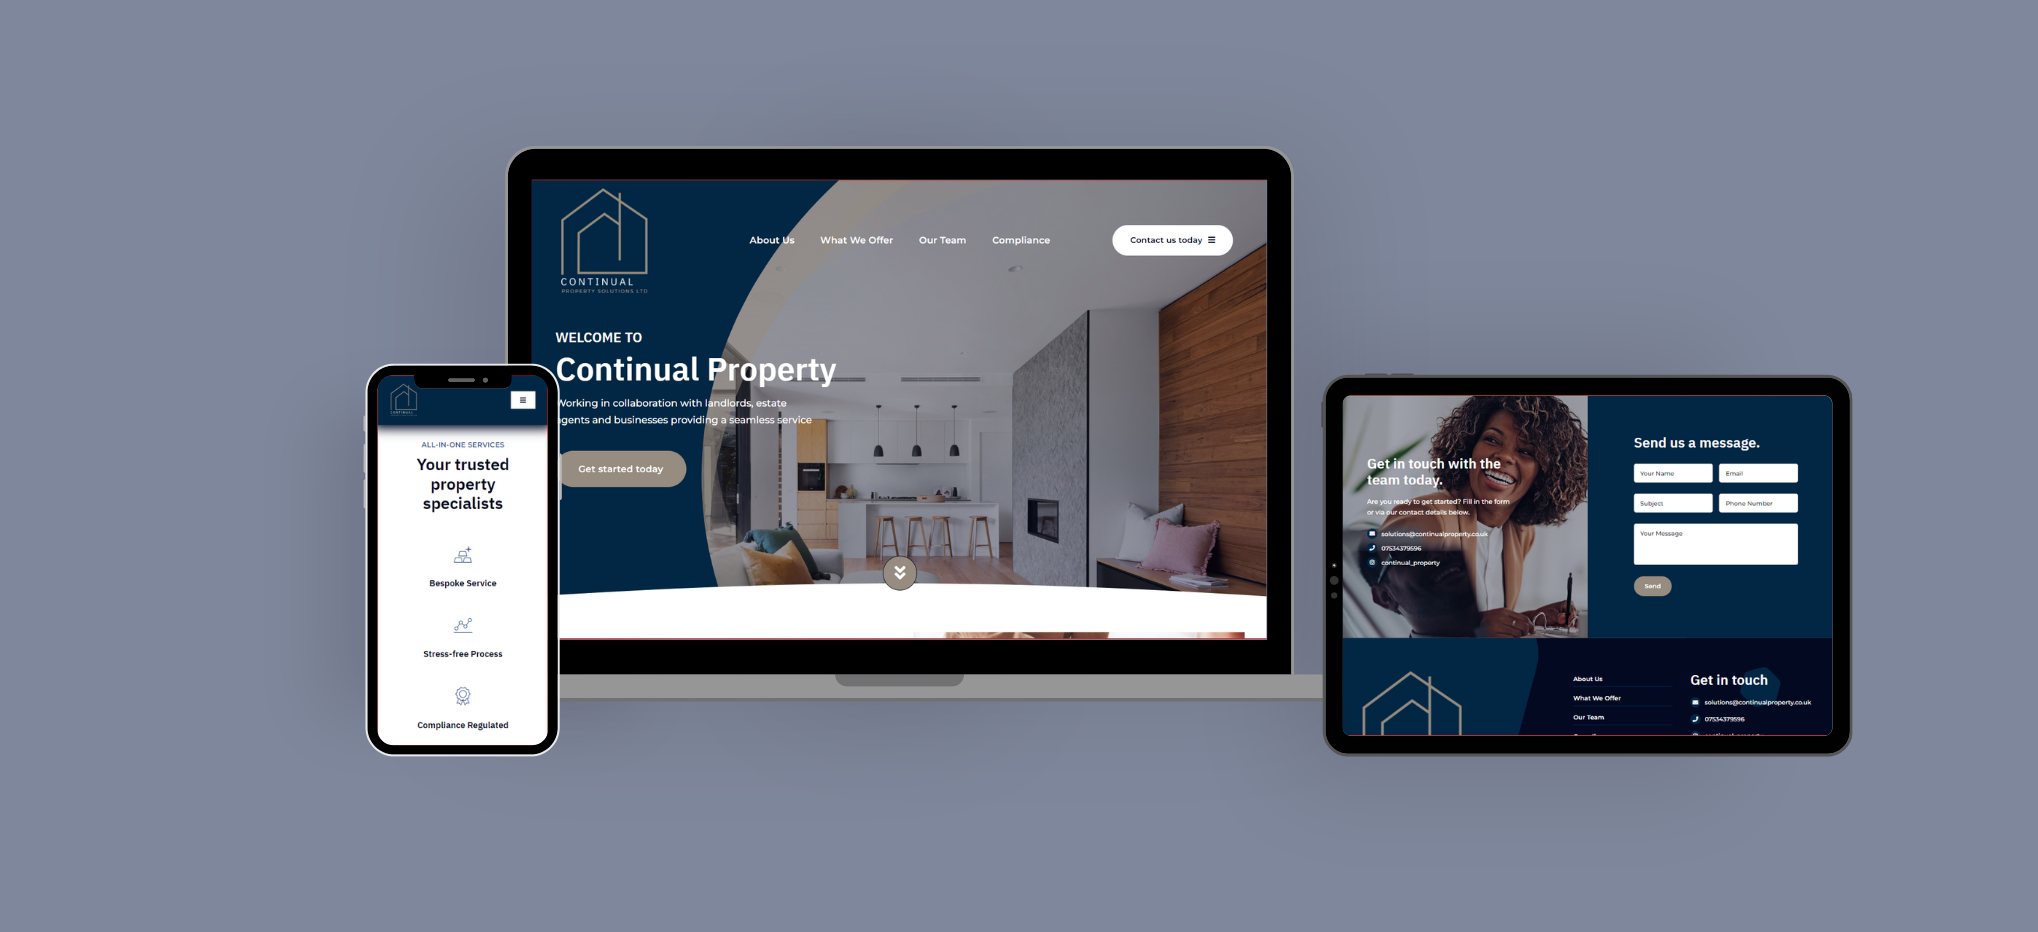 Continual Property Solutions Featured Case Study website design hosting maintenance SEO